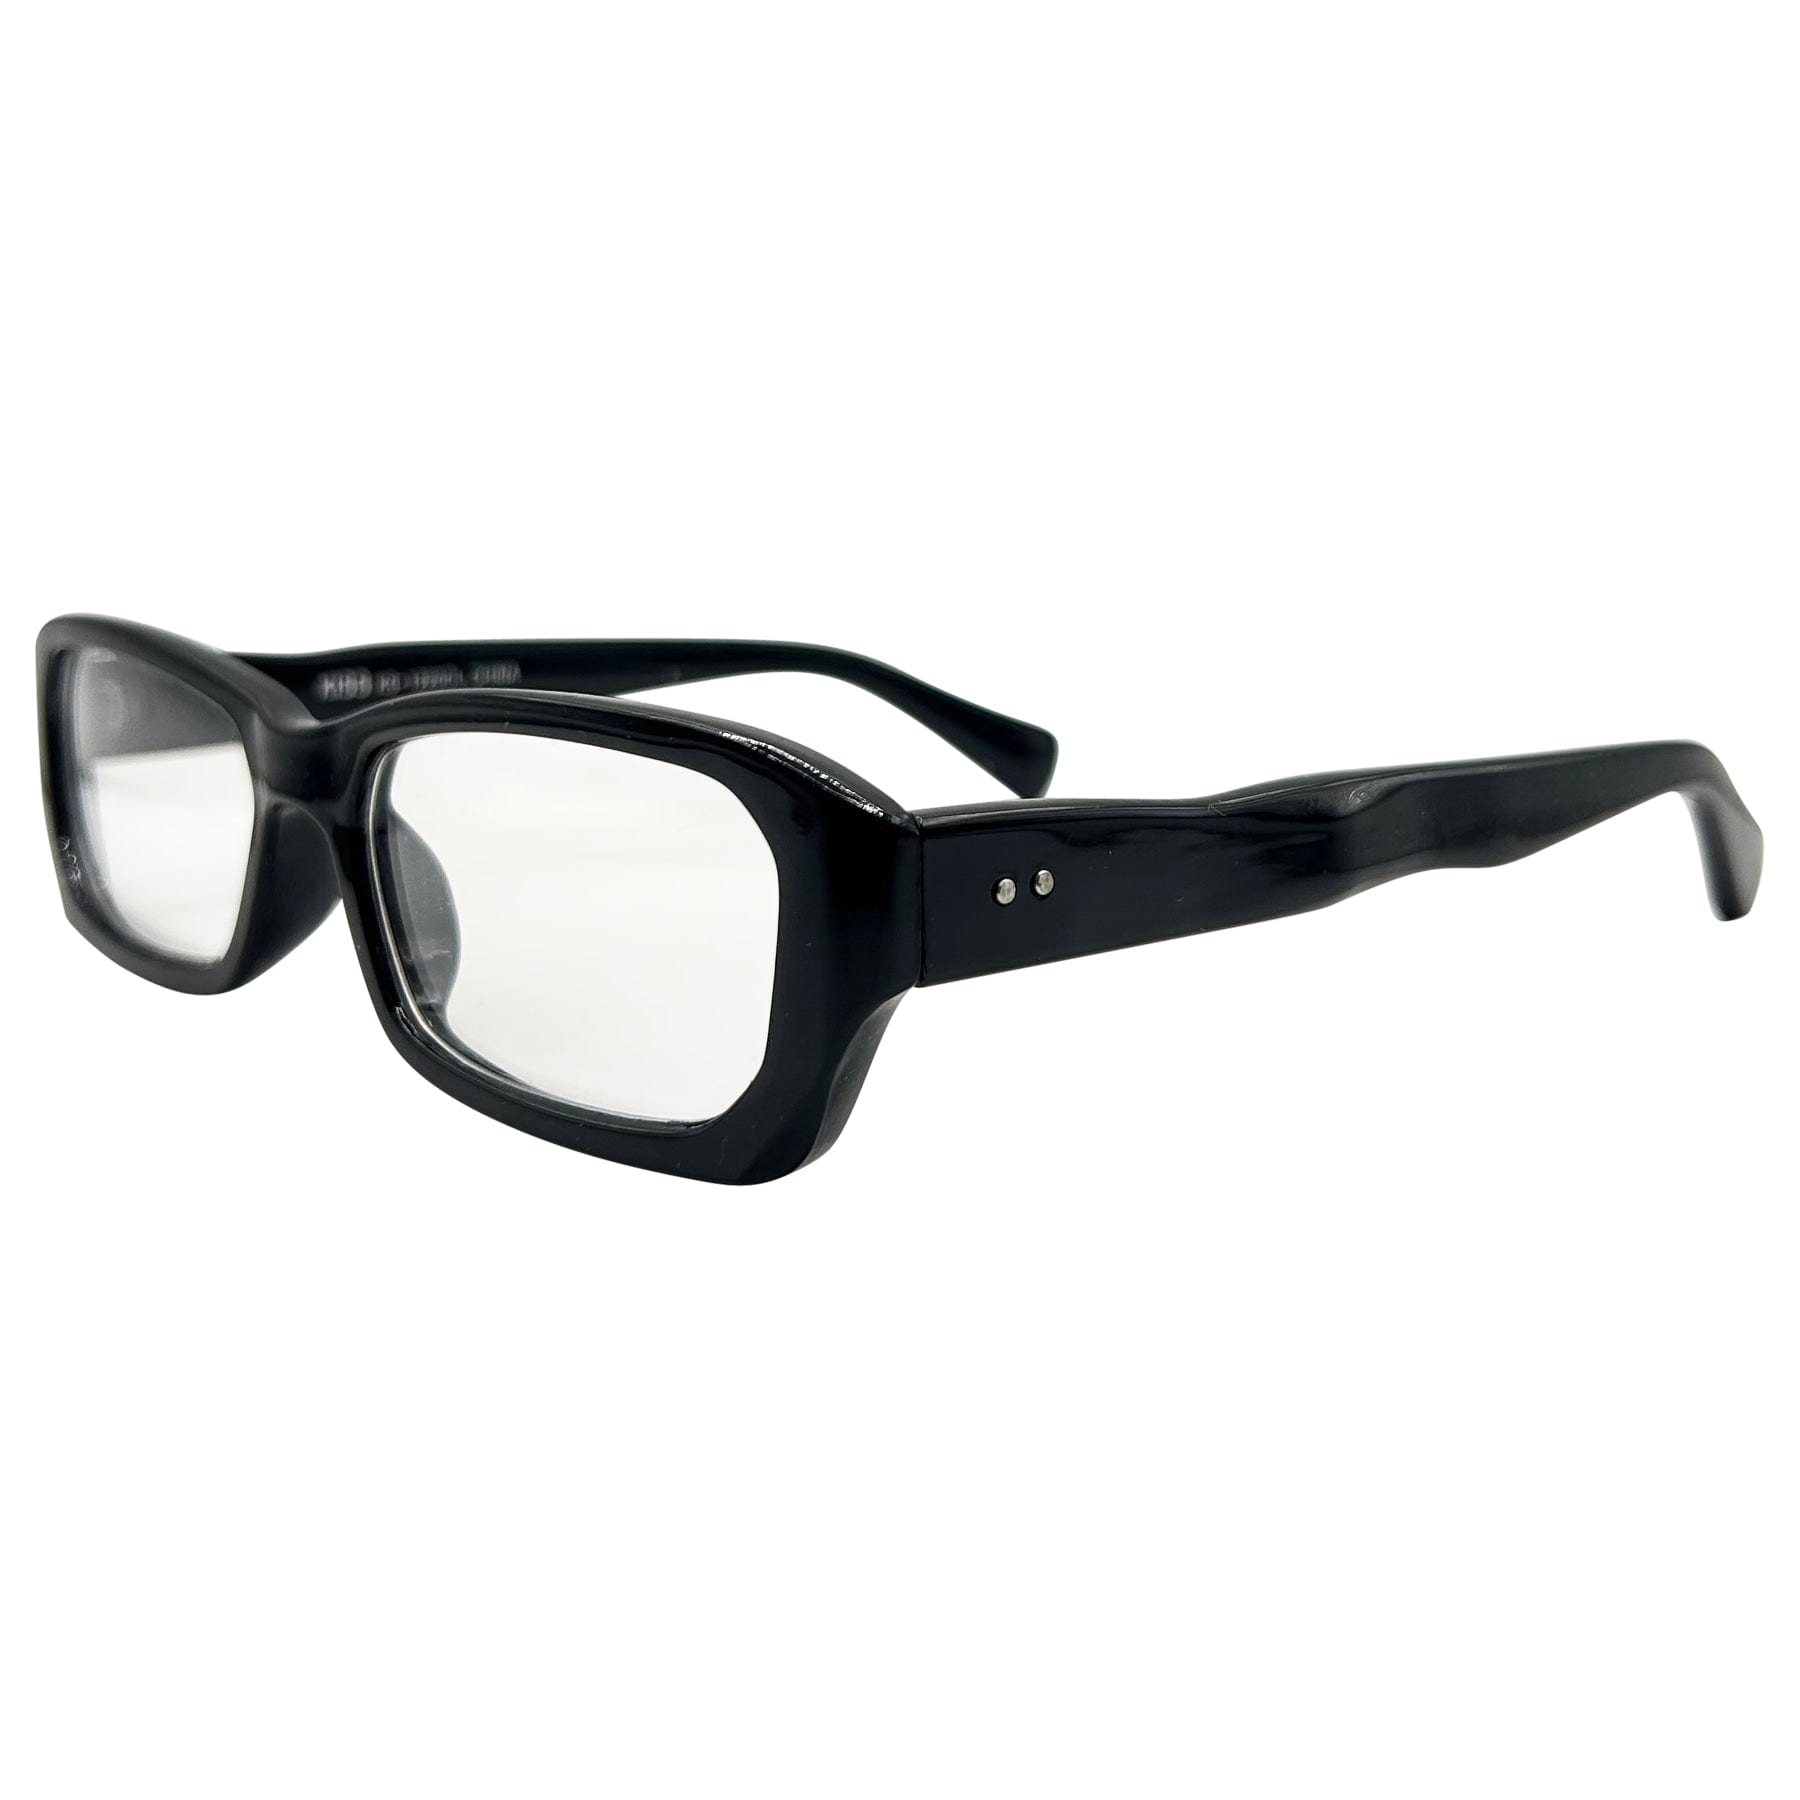 90s retro black glasses with clear lens